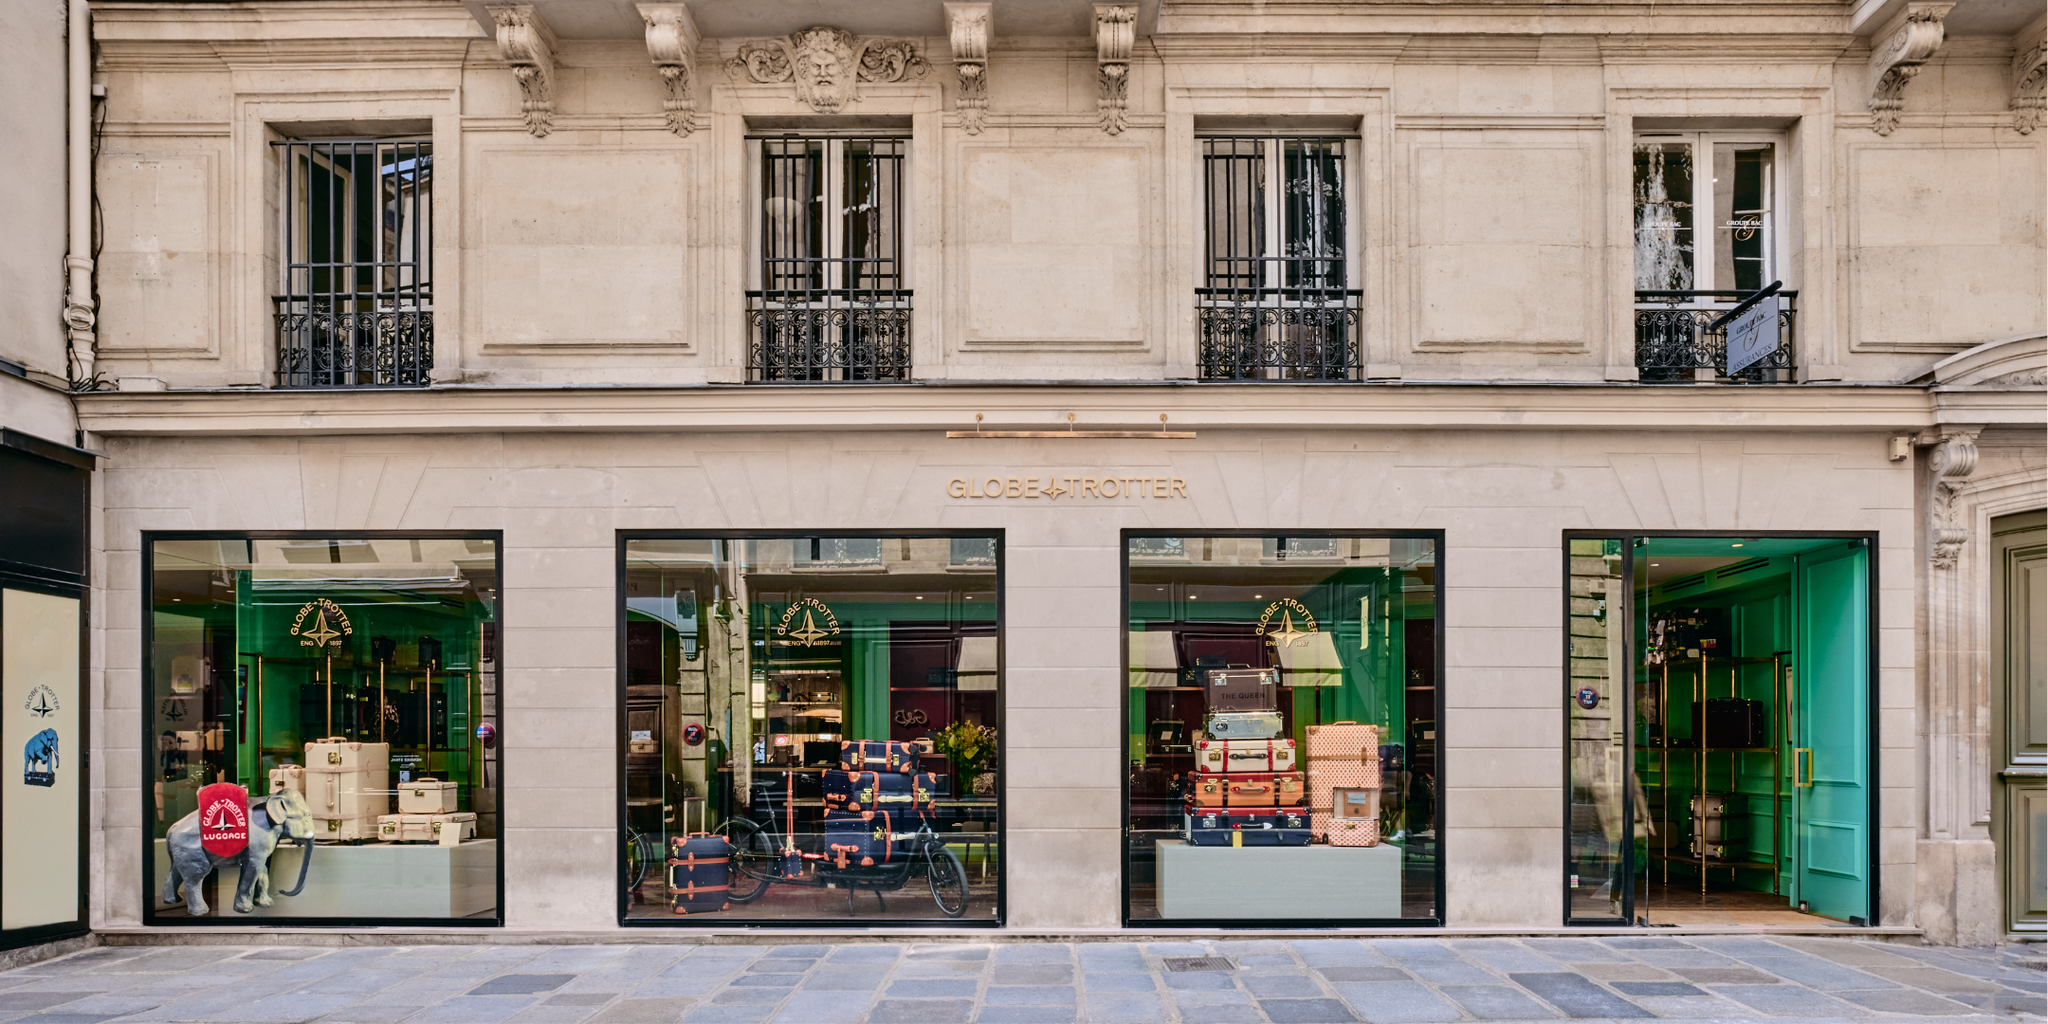 Globe-Trotter-is-proud-to-announce-the-opening-of-a-third-flagship-store-in-Paris-France - GLOBE-TROTTER